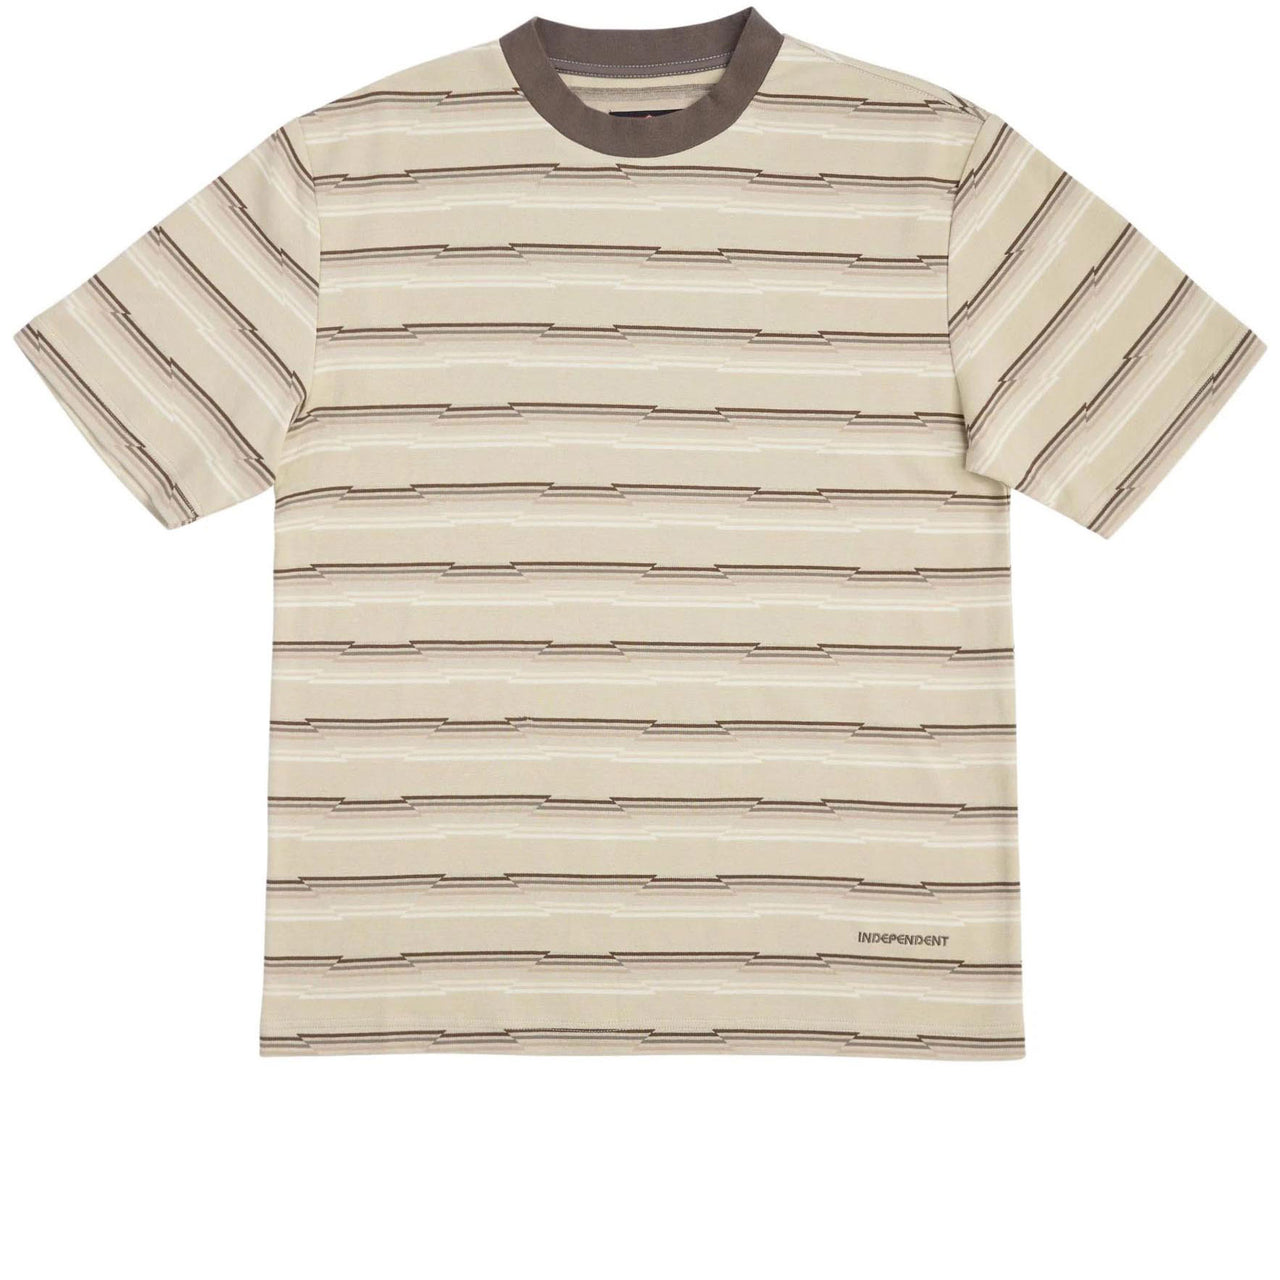 Independent Wired Ringer T-Shirt - Sand Stripe image 1